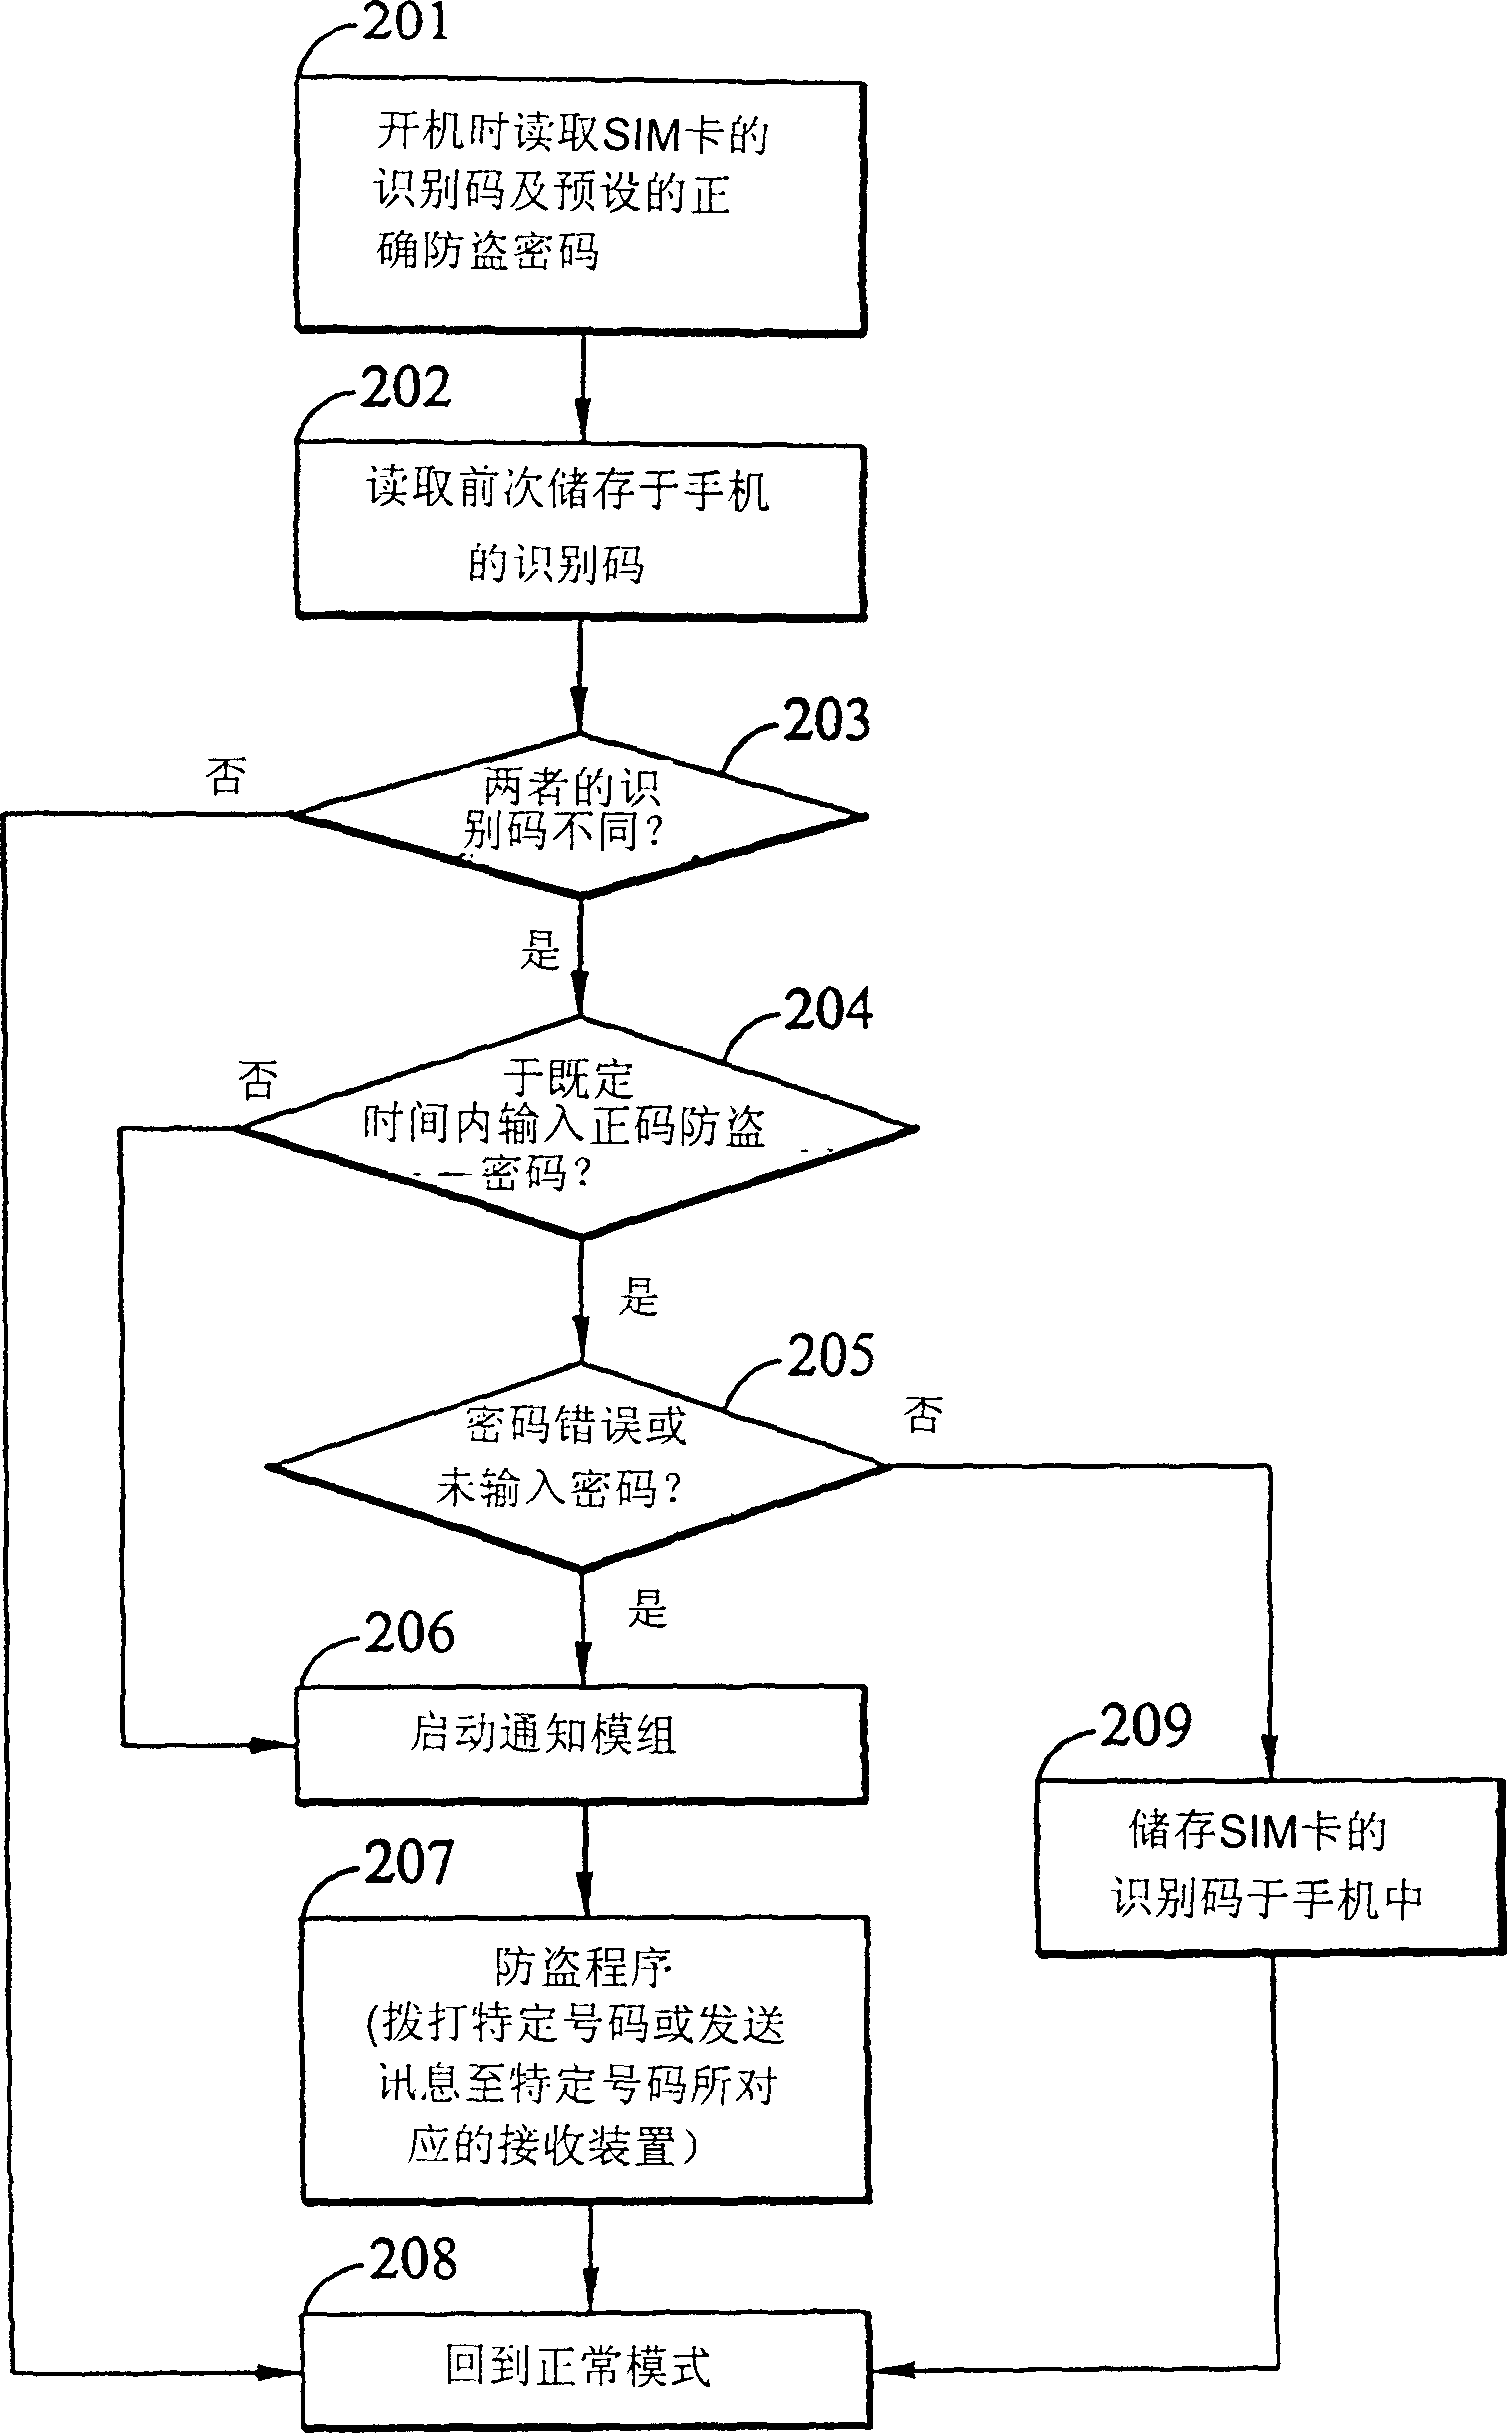 Theft-proof device and method for mobile telephone